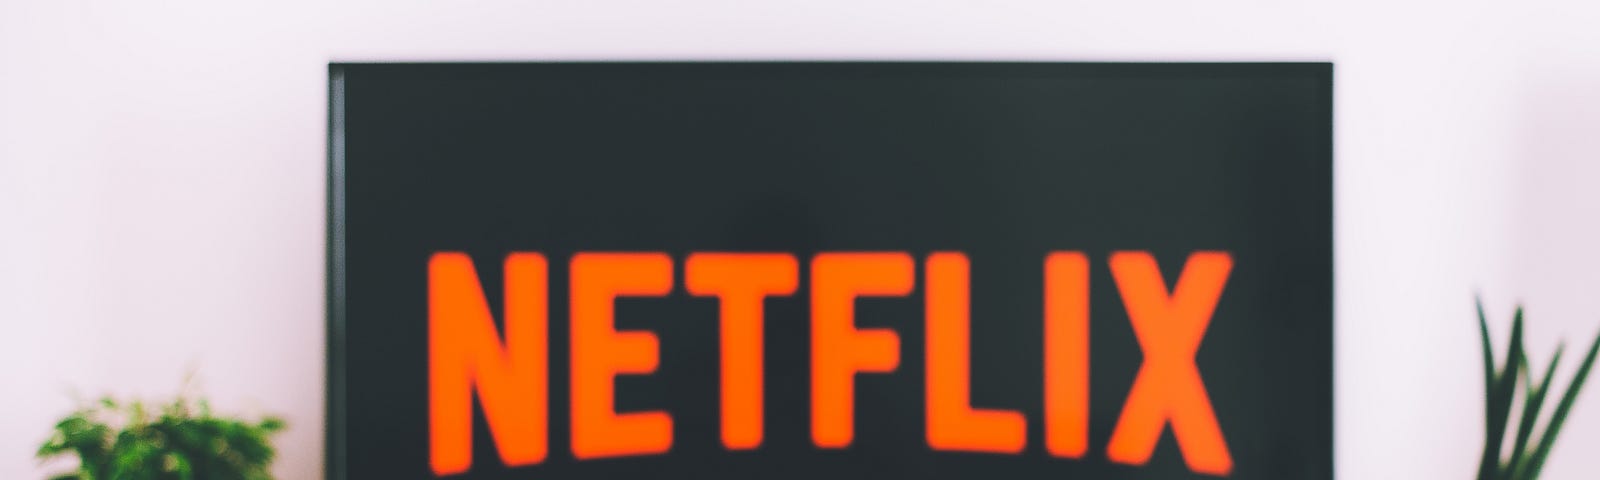 A hand holding a remote in front of a TV showing a Netflix logo